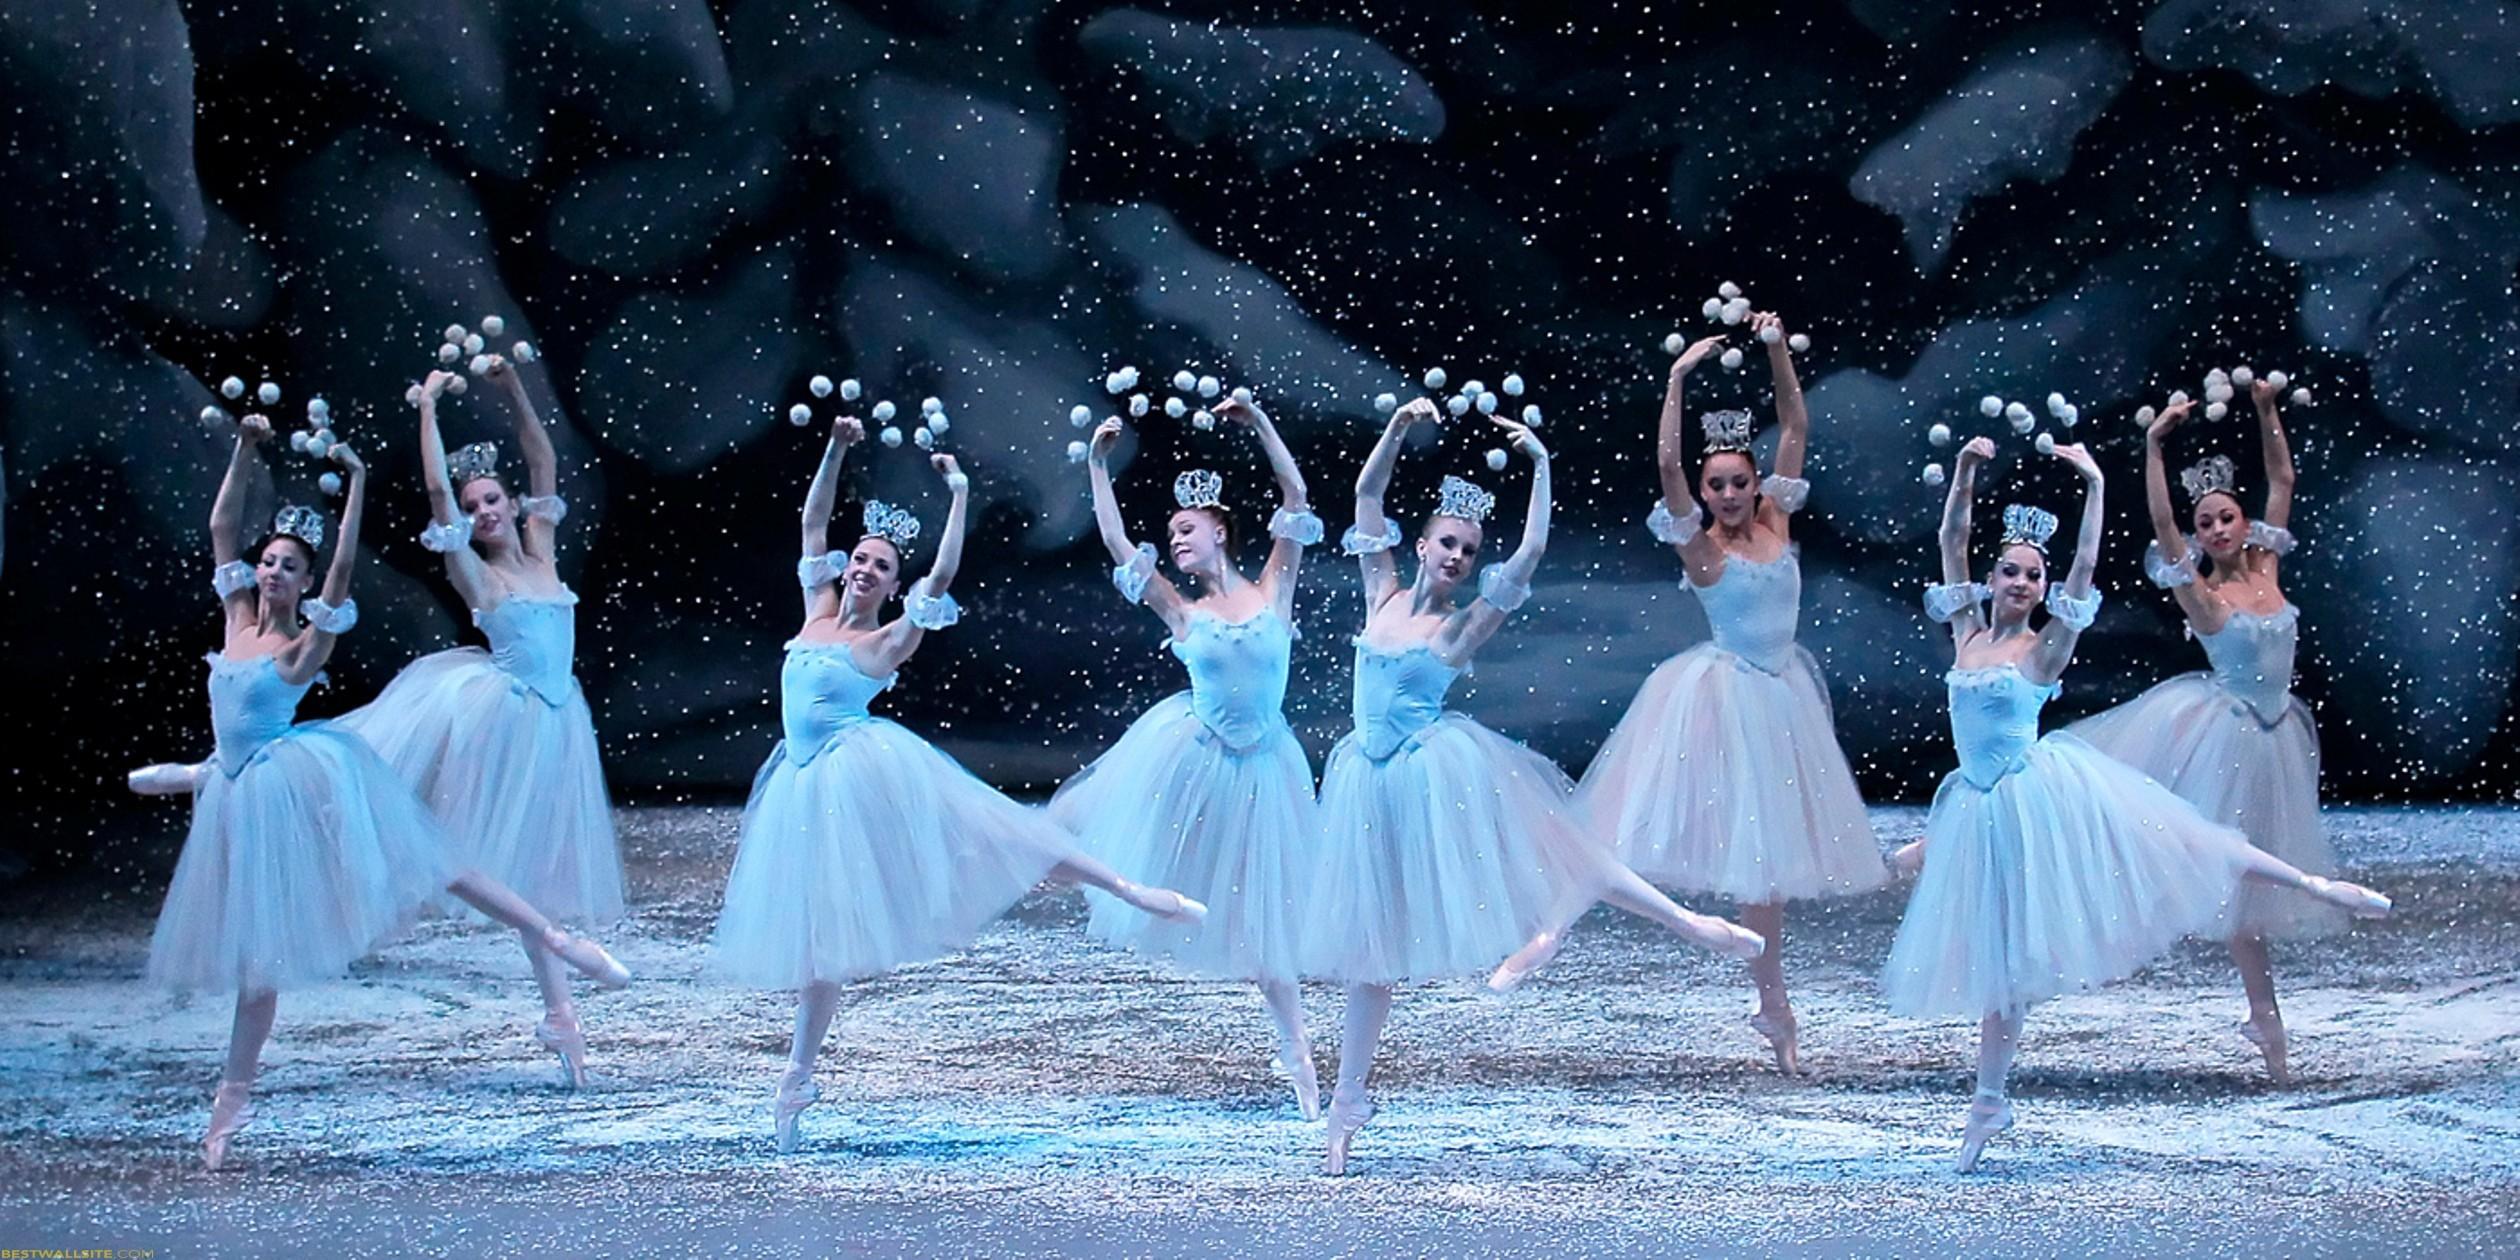 Ballerinas in blue and white tutus stand in a line with arms raised, creating a snowflake effect with their hands. - Ballet